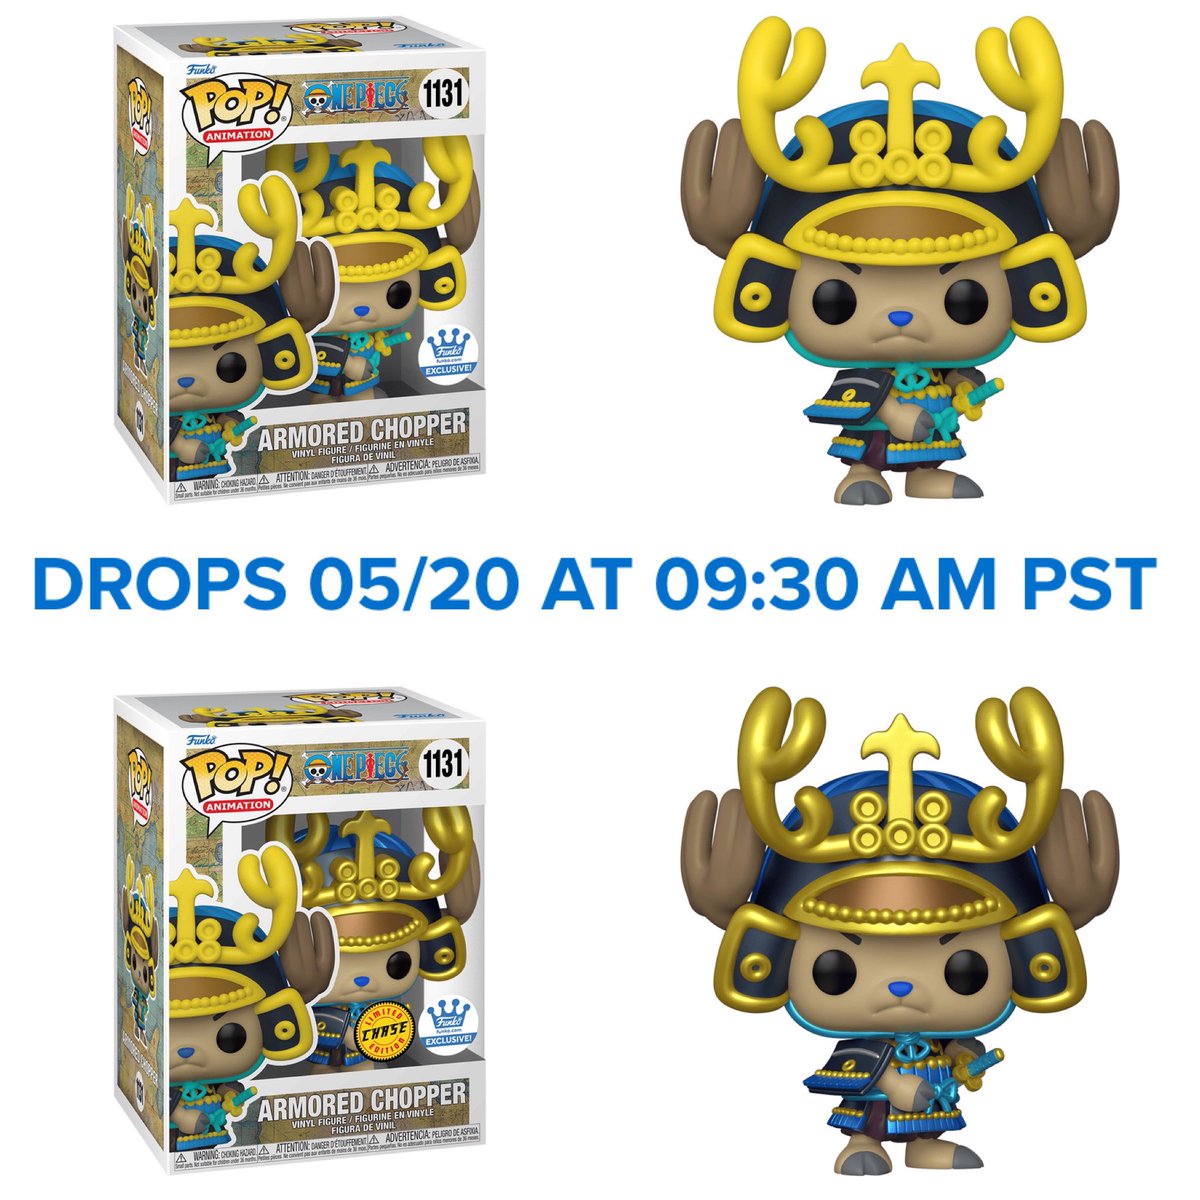 Funko exclusive Armored Chopper is restocking on Monday at 9:30AM PT!
#Ad #OnePiece
.
distracker.info/3QKFP9B
.
#Funko #FunkoPop #FunkoPopVinyl #Pop #PopVinyl #Collectibles #Collectible #FunkoCollector #FunkoPops #Collector #Toy #Toys #DisTrackers